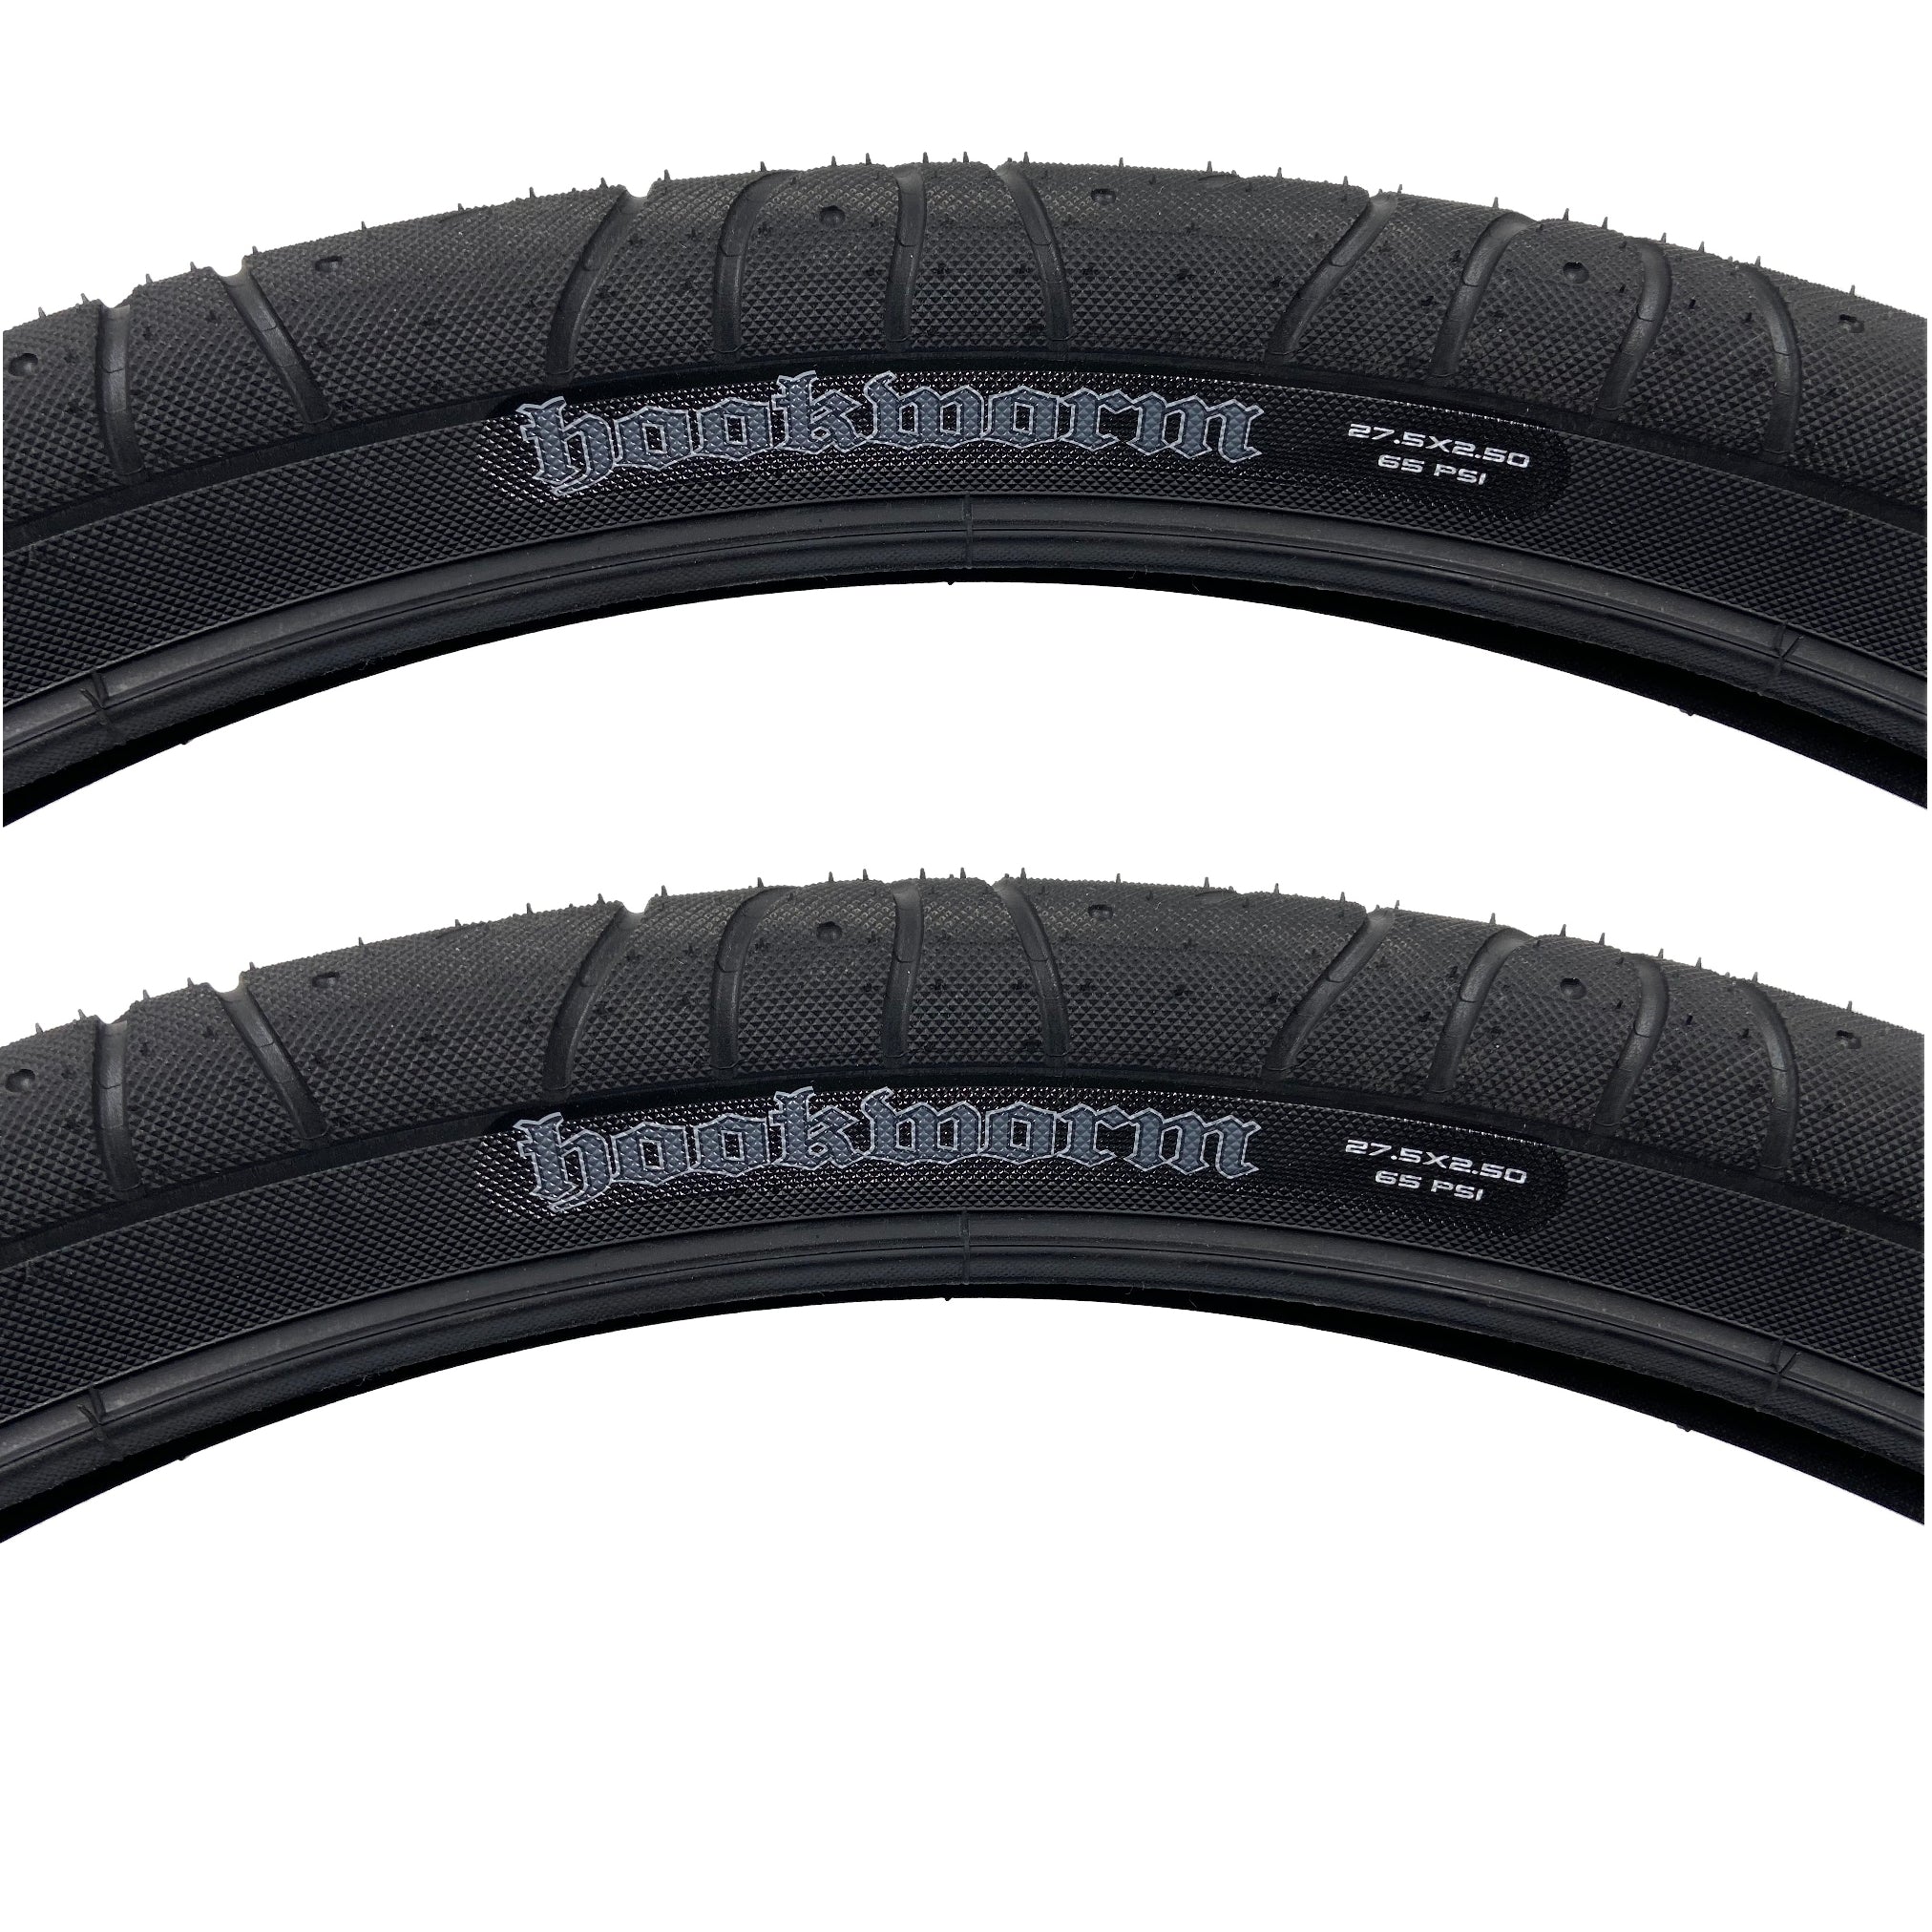 Photo showing a close up of two of the Maxxis Hookworm 27.5"x2.5 tires. The Hookworm logo can be seen on the sidewall as well as the size and the max PSI rating of 65